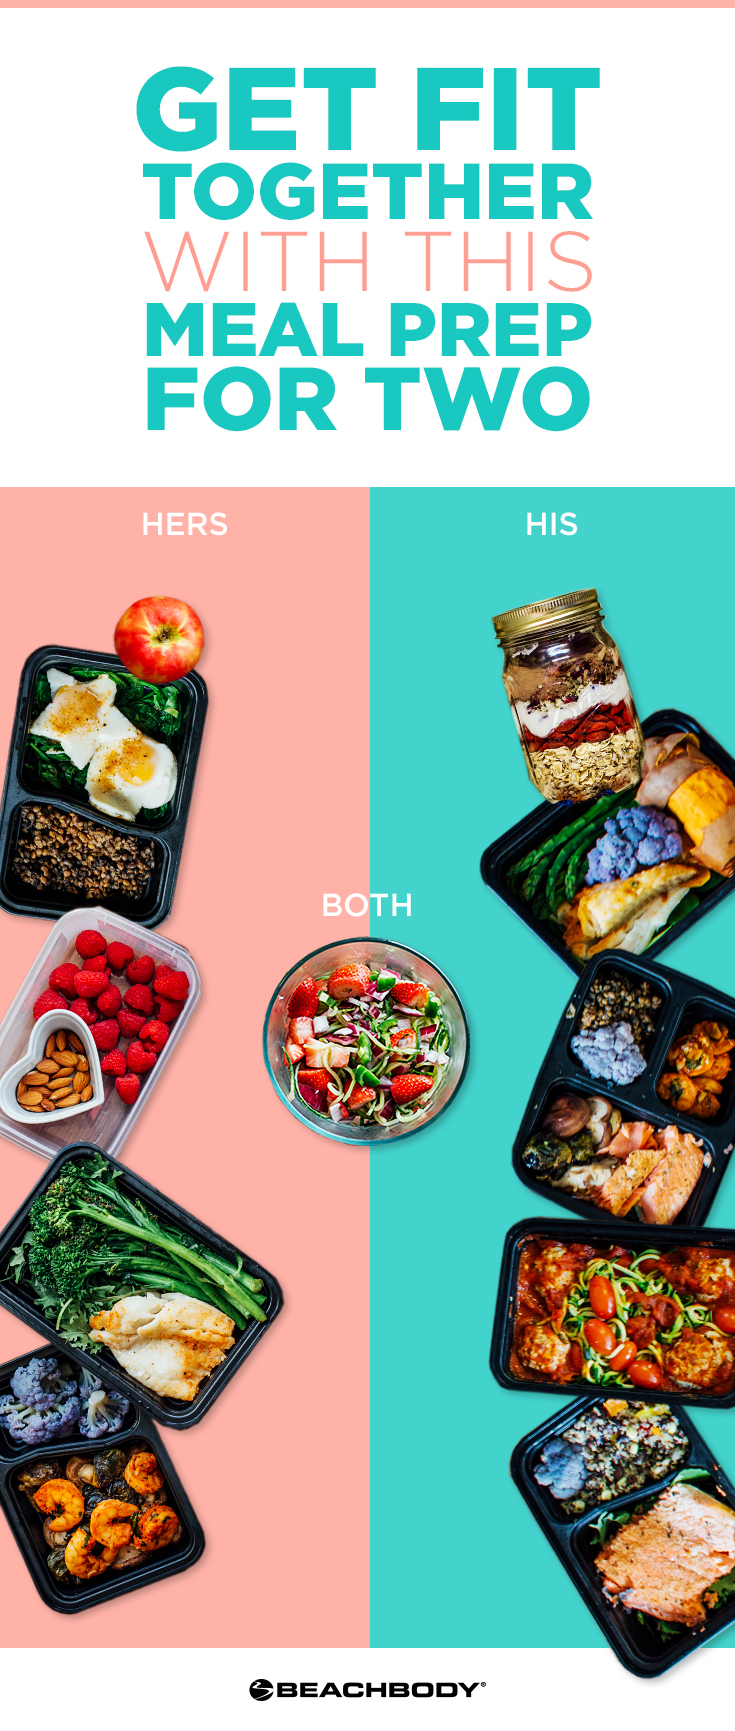  Check out this great meal prep for two! simple meal prep recipes! Perfect for staying healthy even when you're busy. #mealprep #mealpreps #mealplanning #21dayfix #21dayfixideas #21dayfixrecipes #21dayfixmealprep #couplesmealprep